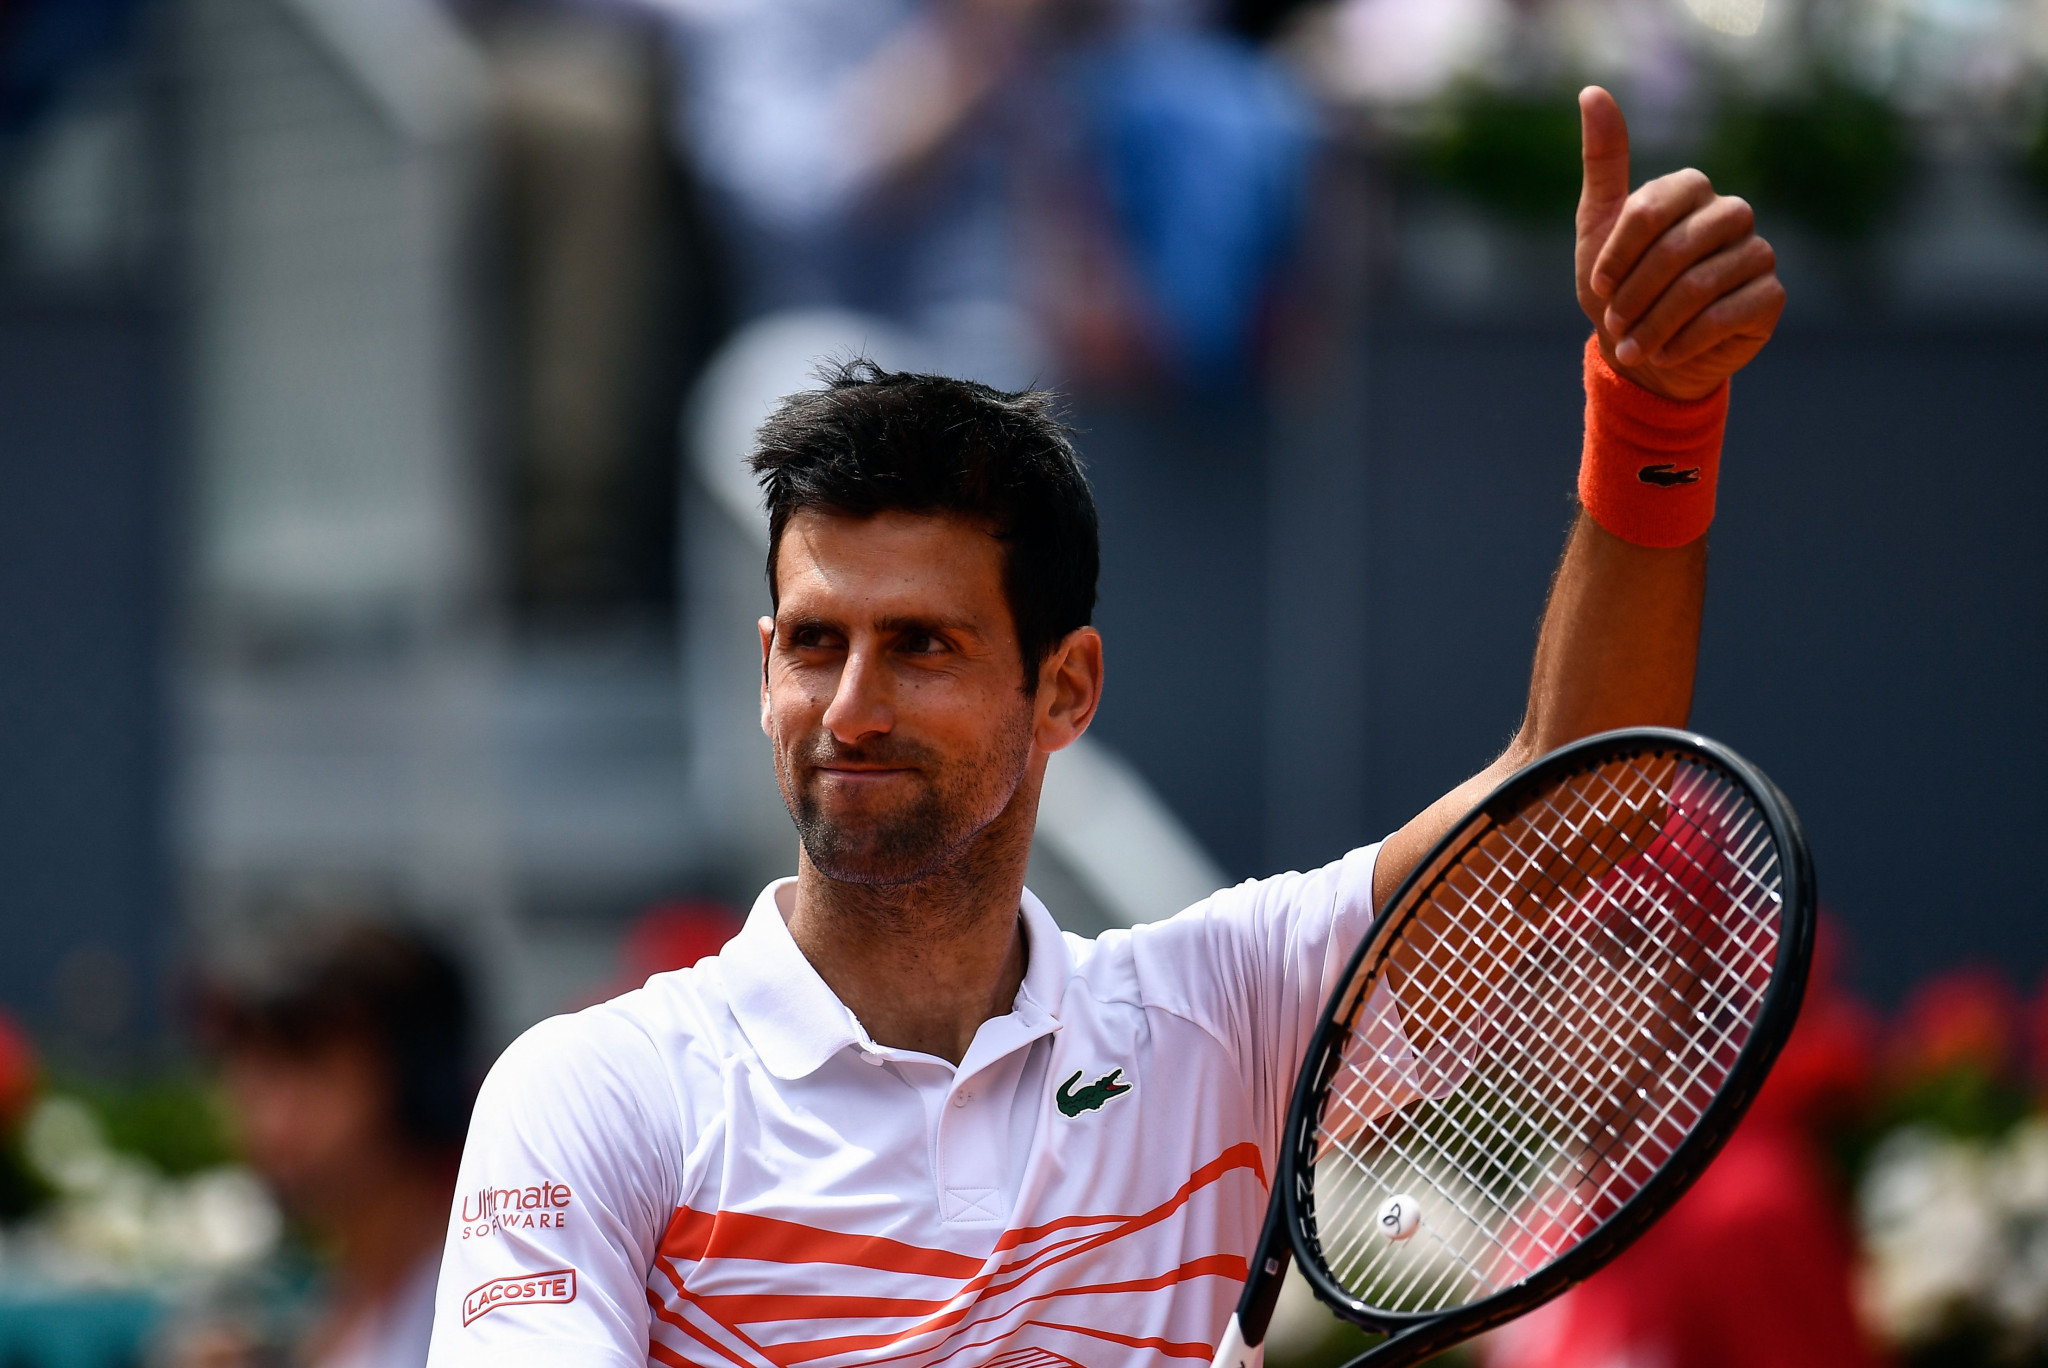 Top seed Novak Djokovic secured his spot in the last 16 of the Madrid Open after comfortably beating American Taylor Fritz in straight sets today ©Getty Images